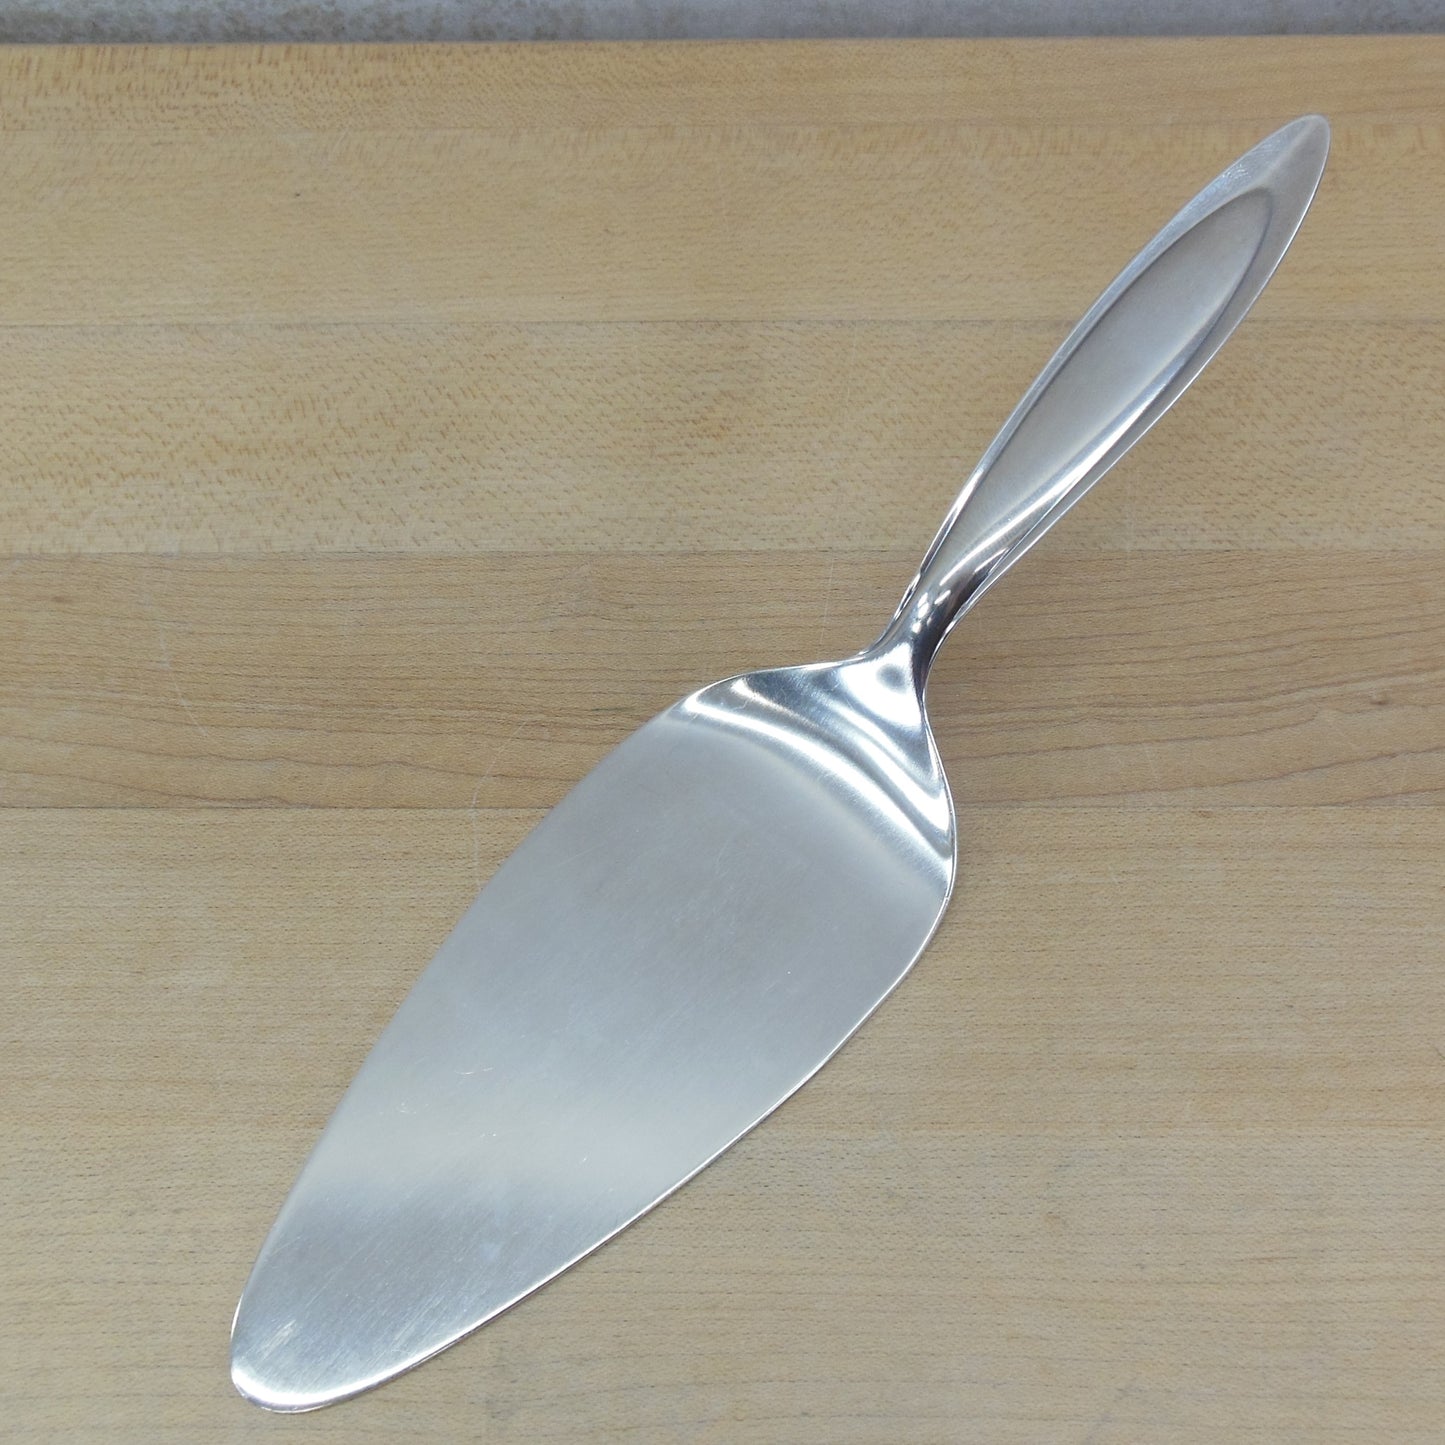 WMF Germany Silverplate 90 Cake Pie Server - Unknown Pattern Outline Pointed Tip